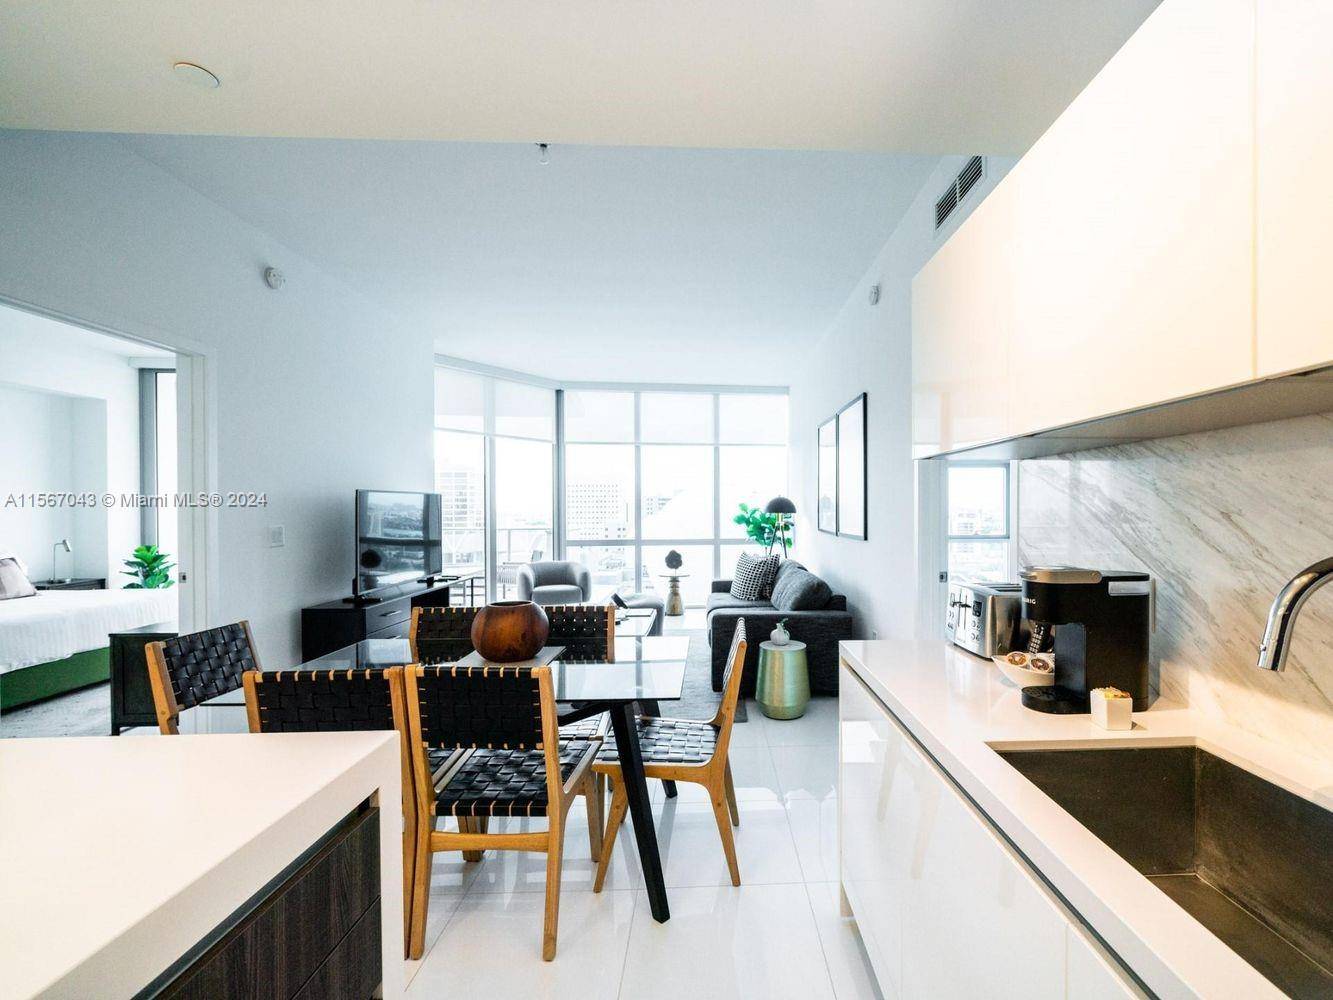 3 BEDROOM 3 BATHROOM Perfect location In Hard Downtown Miami World Center HIGH CEILINGS 10' WITH A FLOOR TO CEILING WINDOWS ITALIAN KITCHEN AND TOP OF THE LINE APPLIANCES BOSH ...